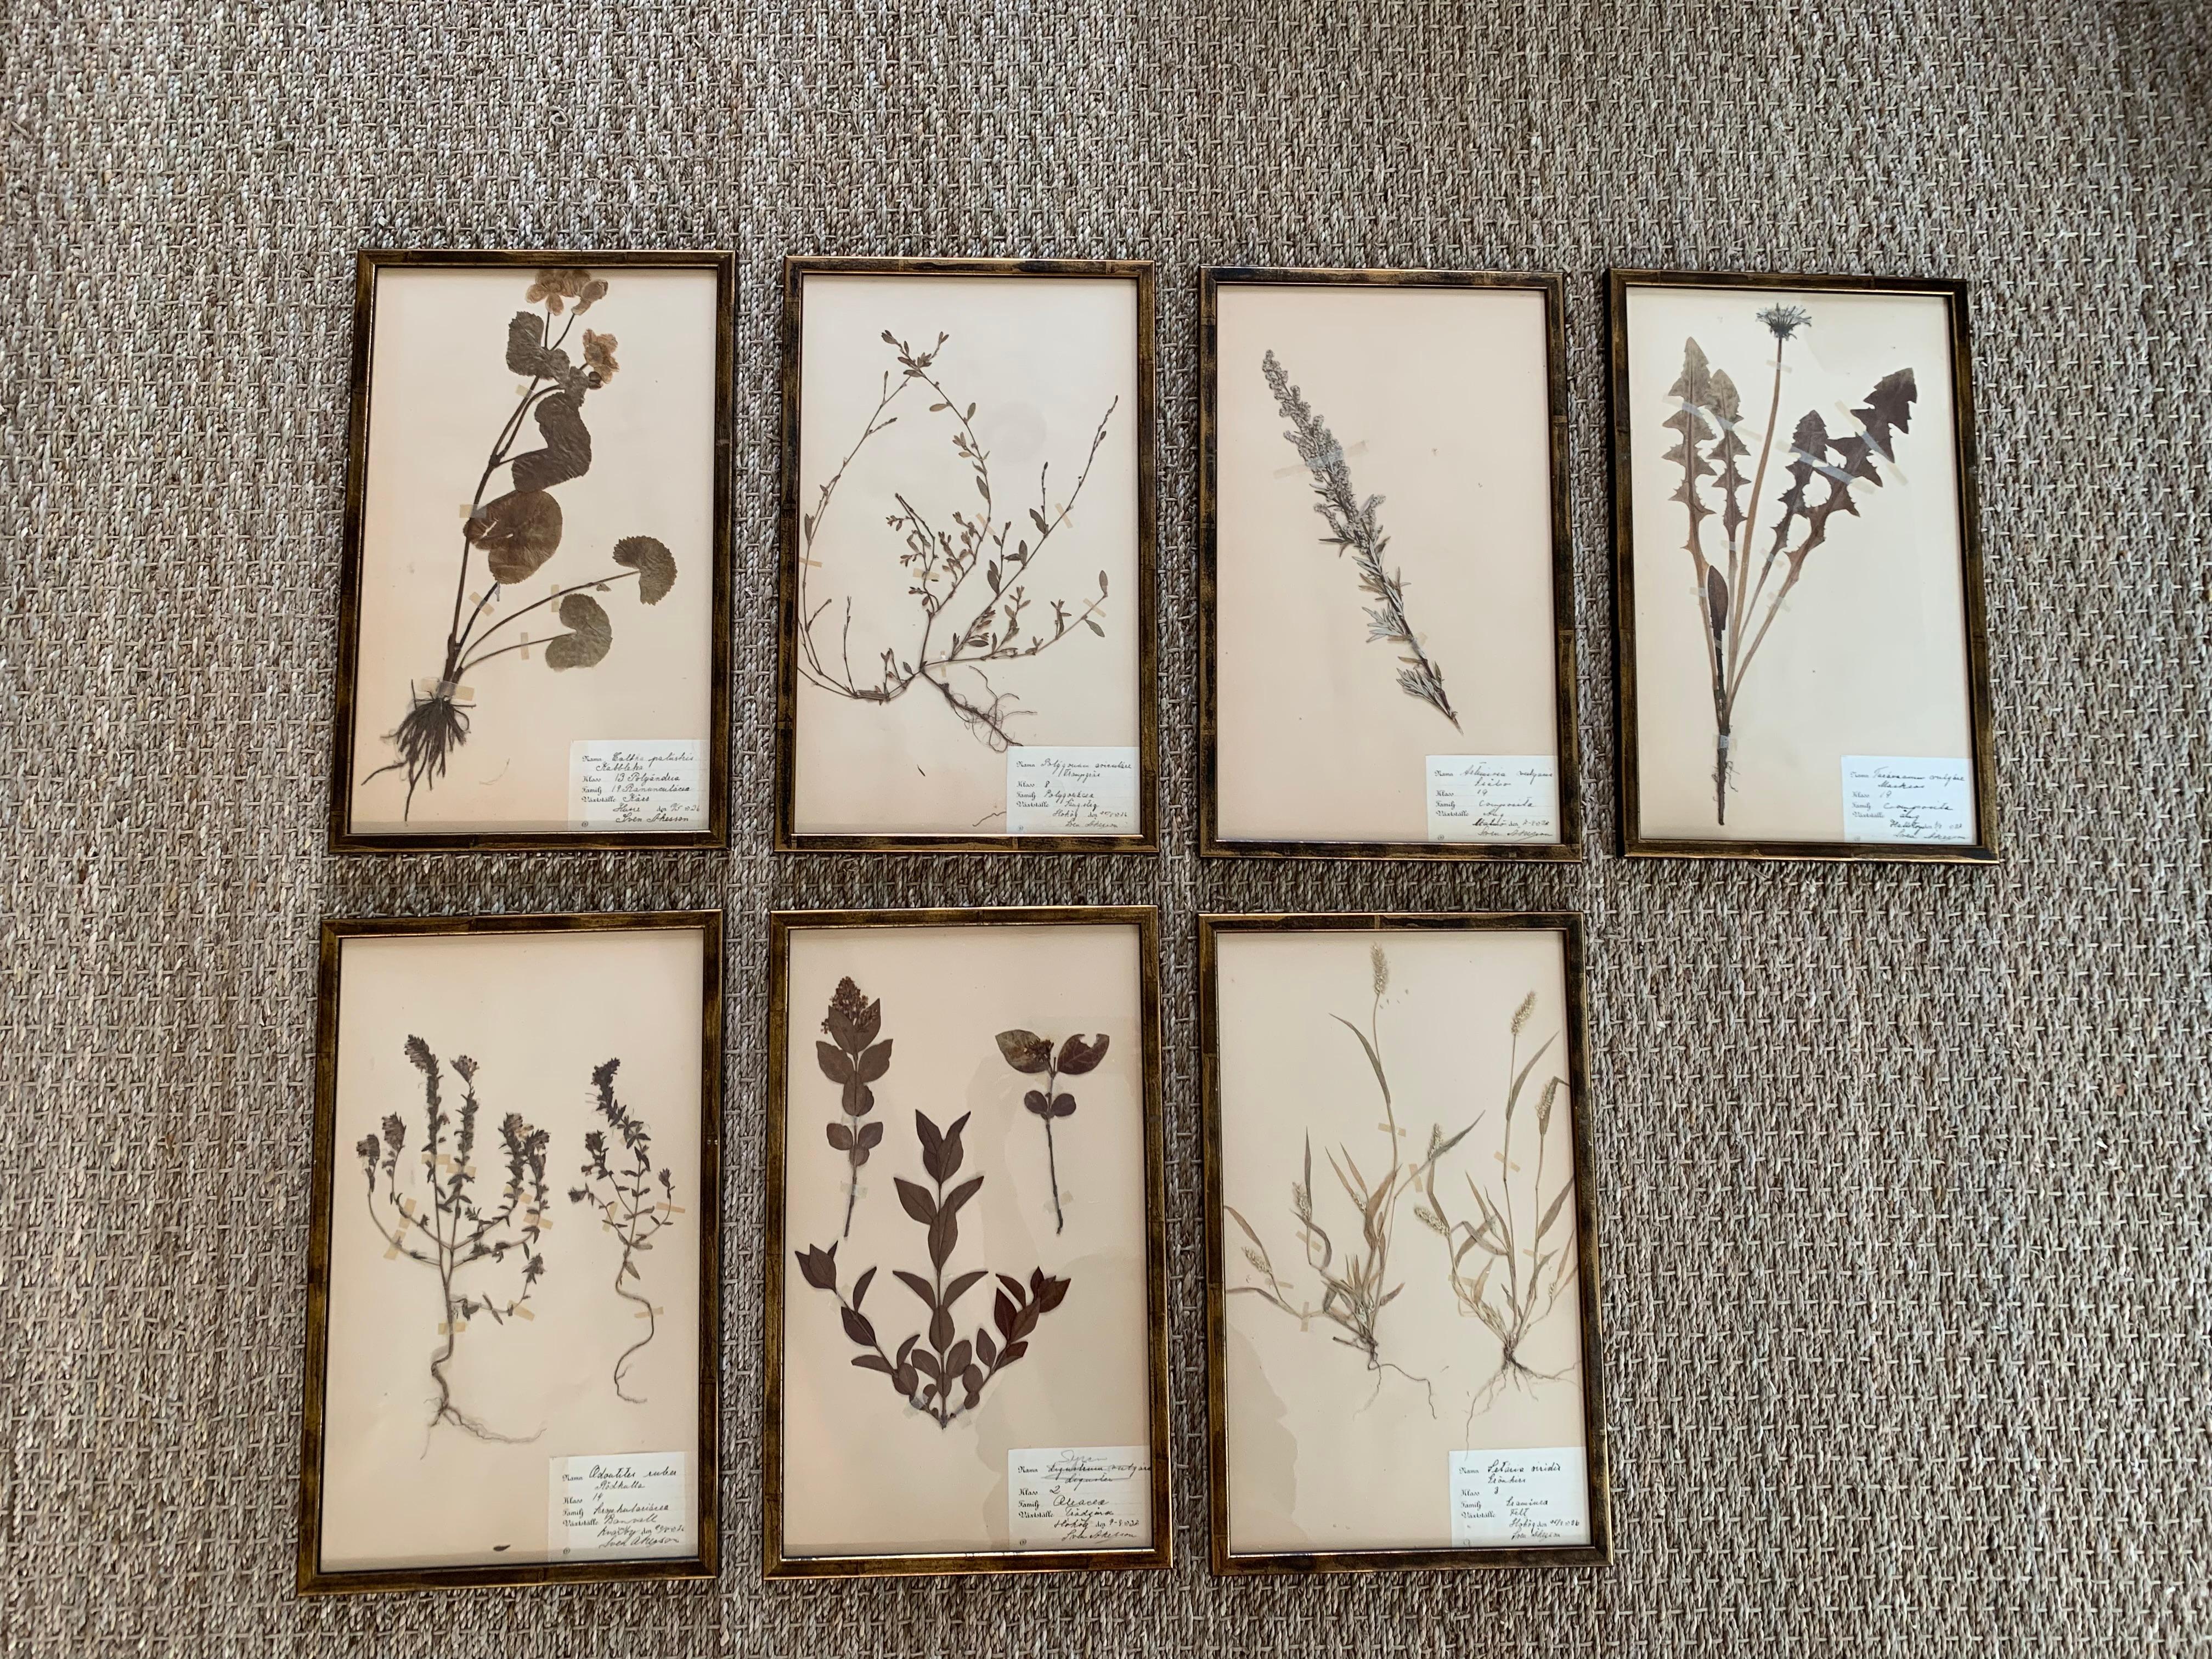 A lovely collection of seven Swedish herbarium studies from the early 20th century with original dated labels. Catalogued by hand with the latin name of the plant and the date. Beautiful bronze and black painted frames. Sold separately.